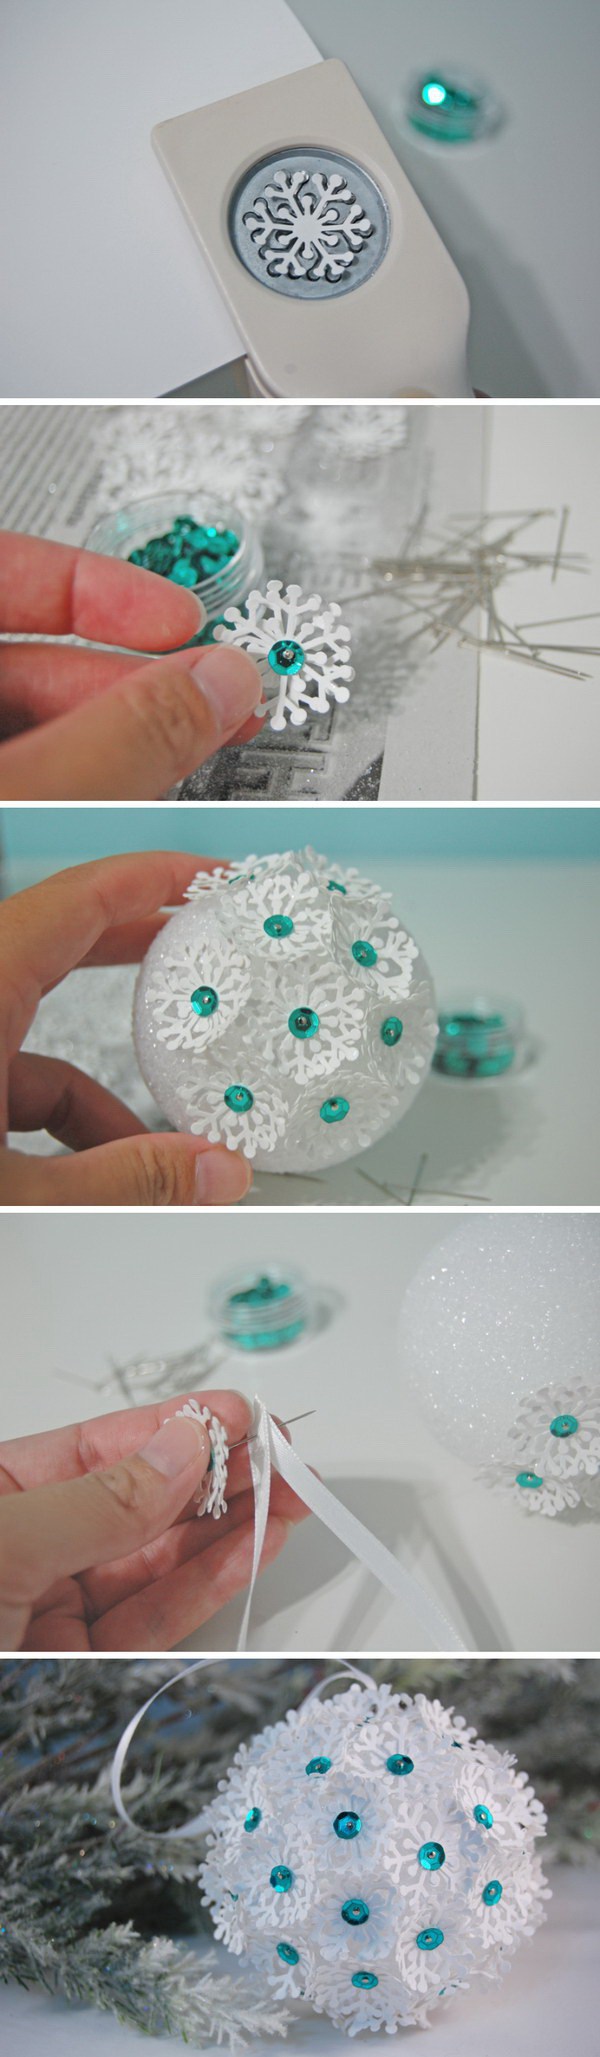 DIY Christmas Tree Ornaments: 17 Great Tutorials and Ideas (Part 2)